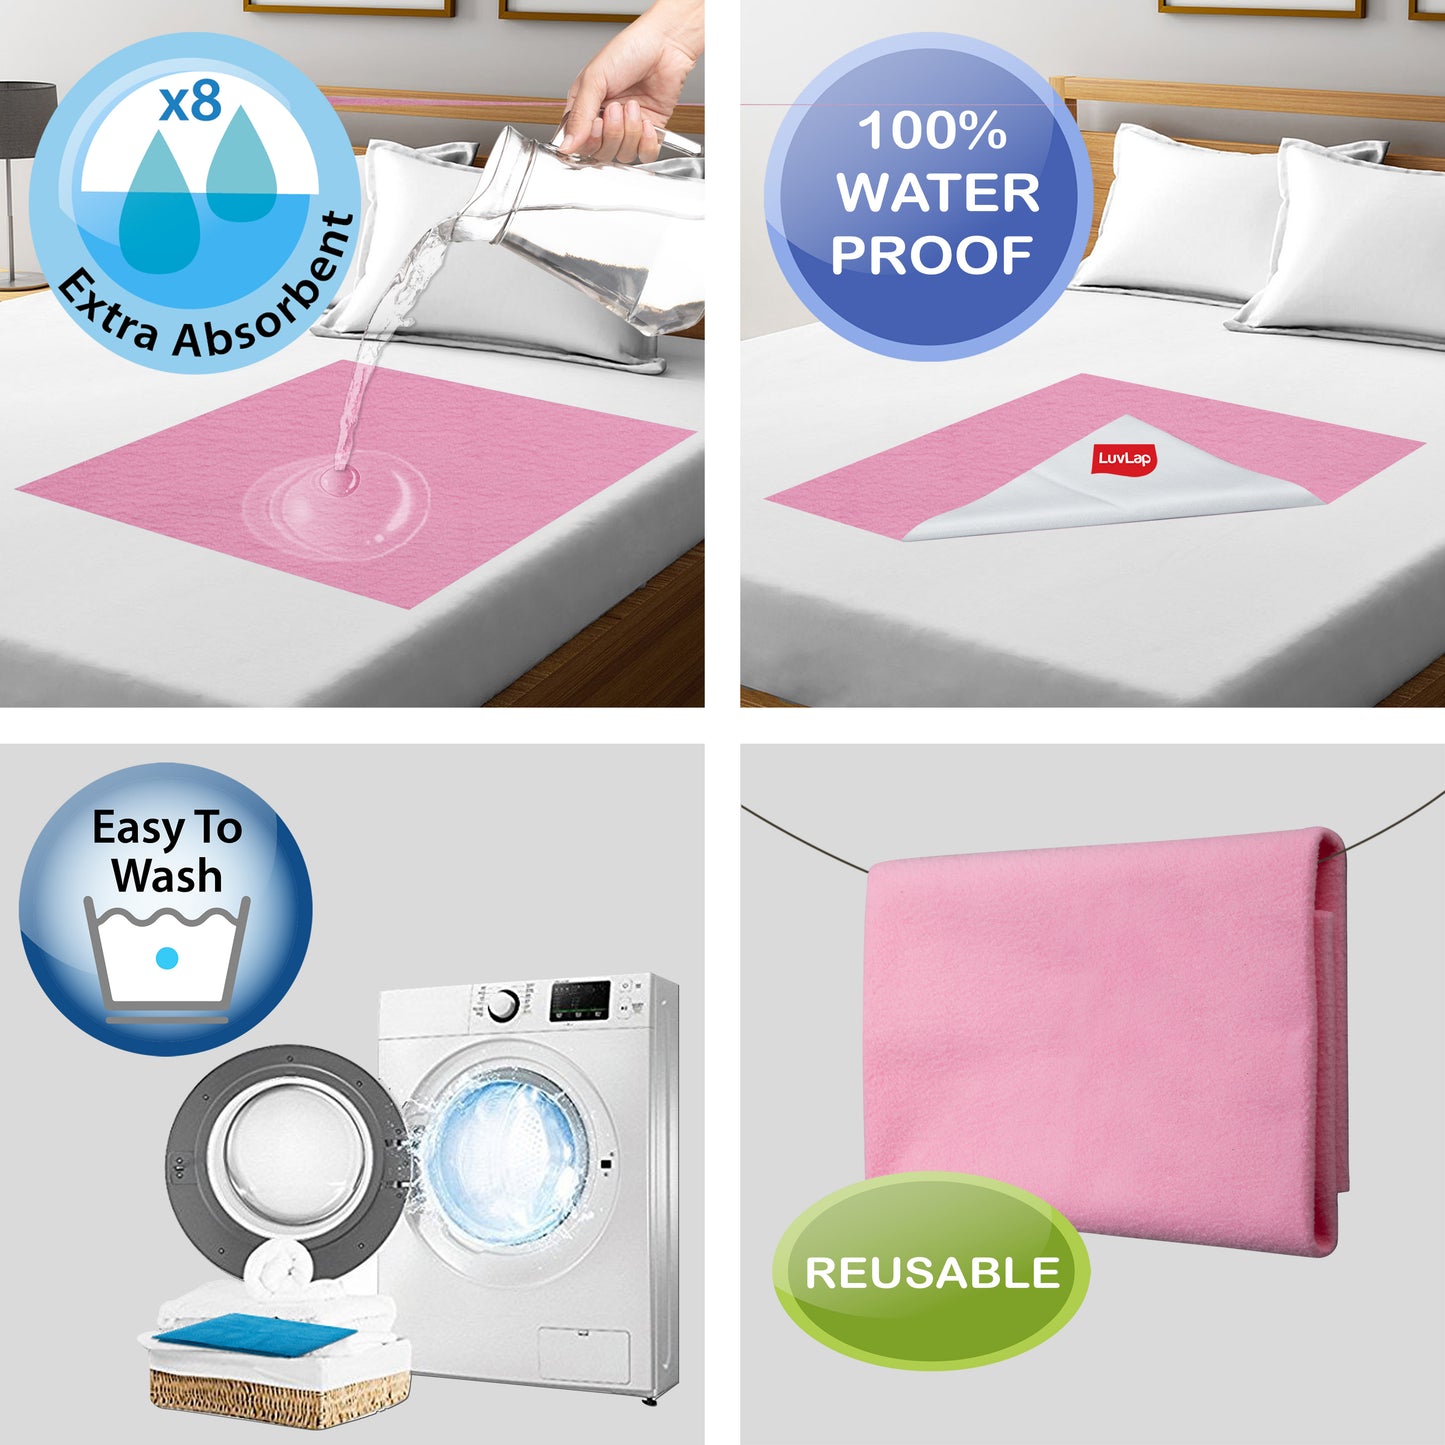 Dry Sheet- Sky Blue & Baby Pink, 0m+ - Small 50 x 70cm, Pack of 2